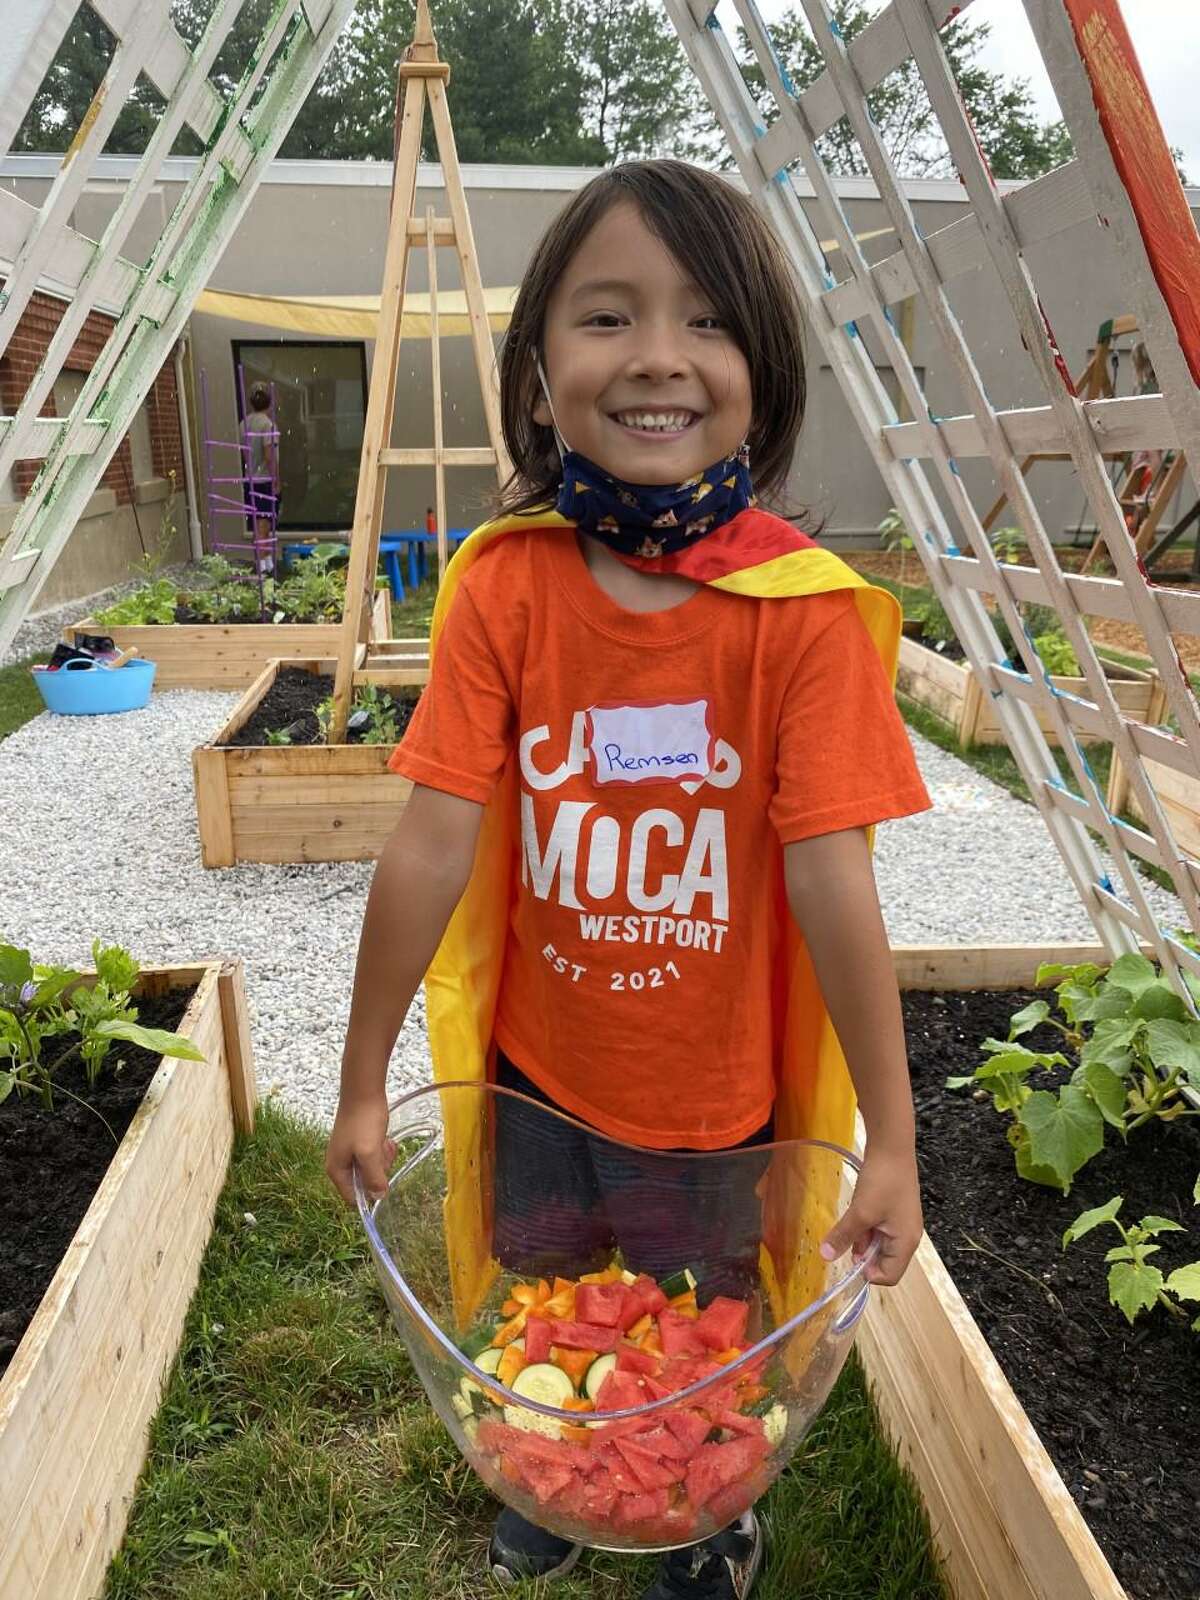 Registration is now open for the Museum of Contemporary Art of Westport’s art museum’s weekly summer day camp, Camp MoCA 2022. A previous summer camp is shown.